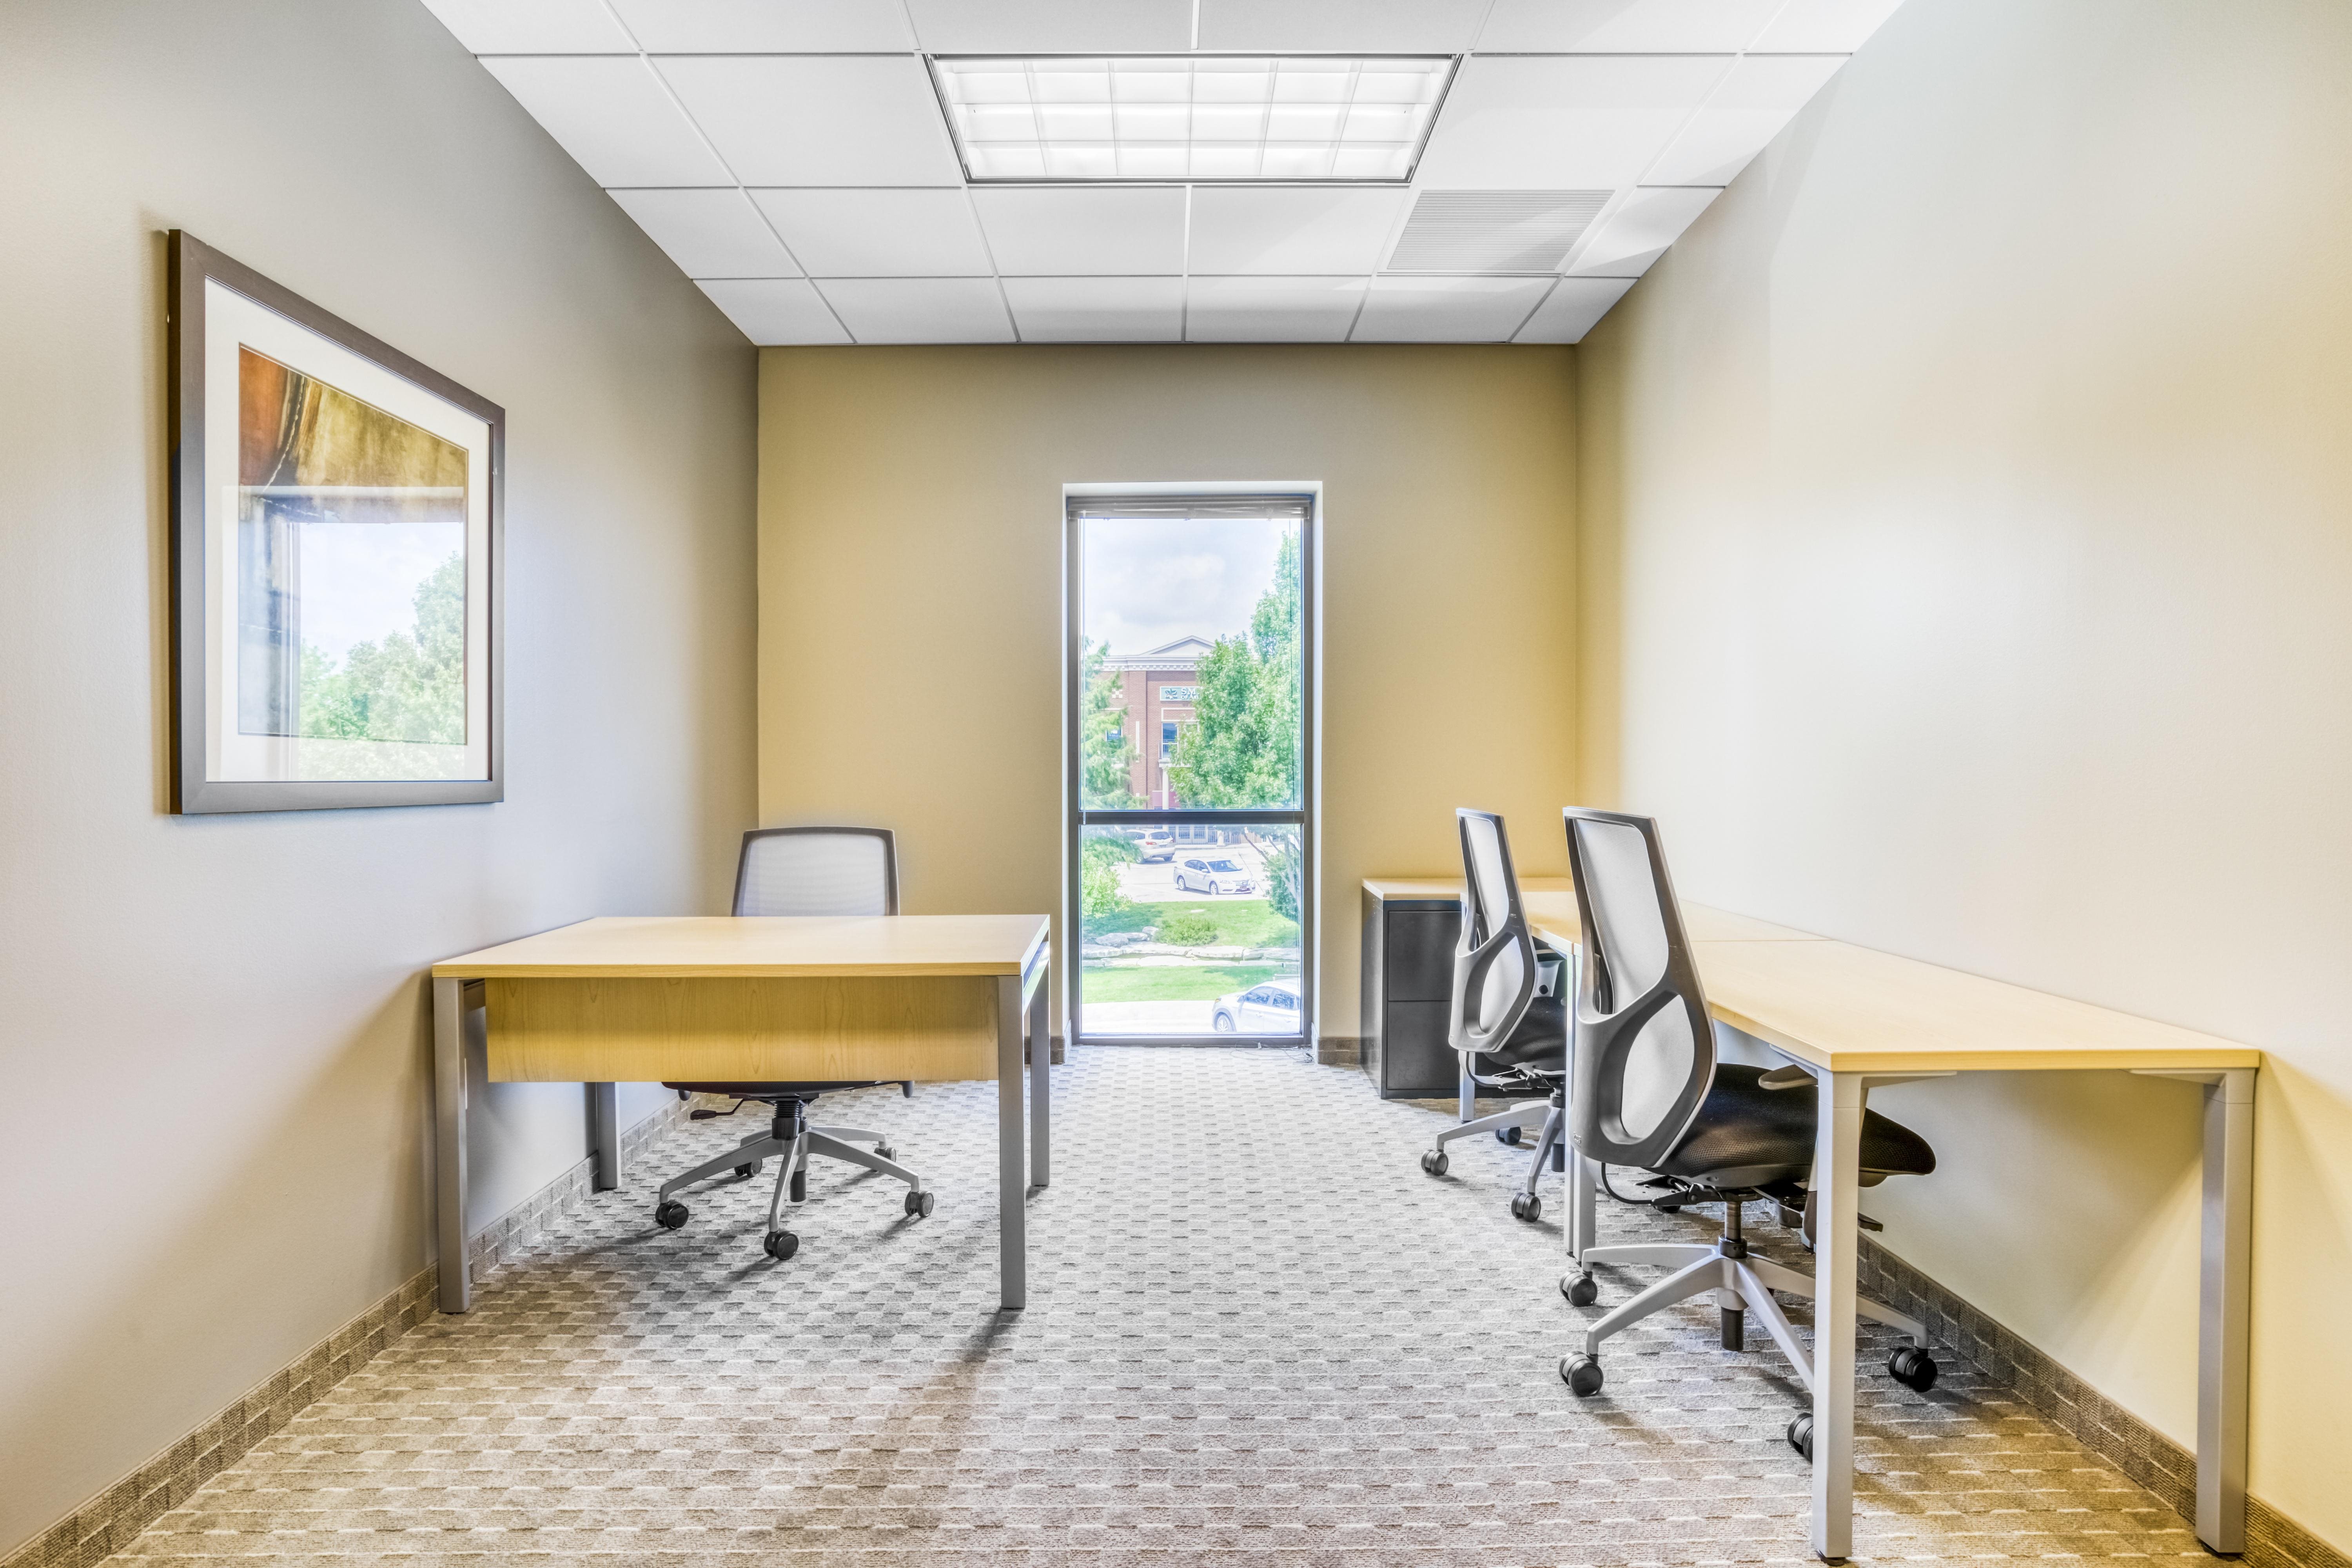 Office Space For Rent Arlington Texas Executive Suites Offices To Let